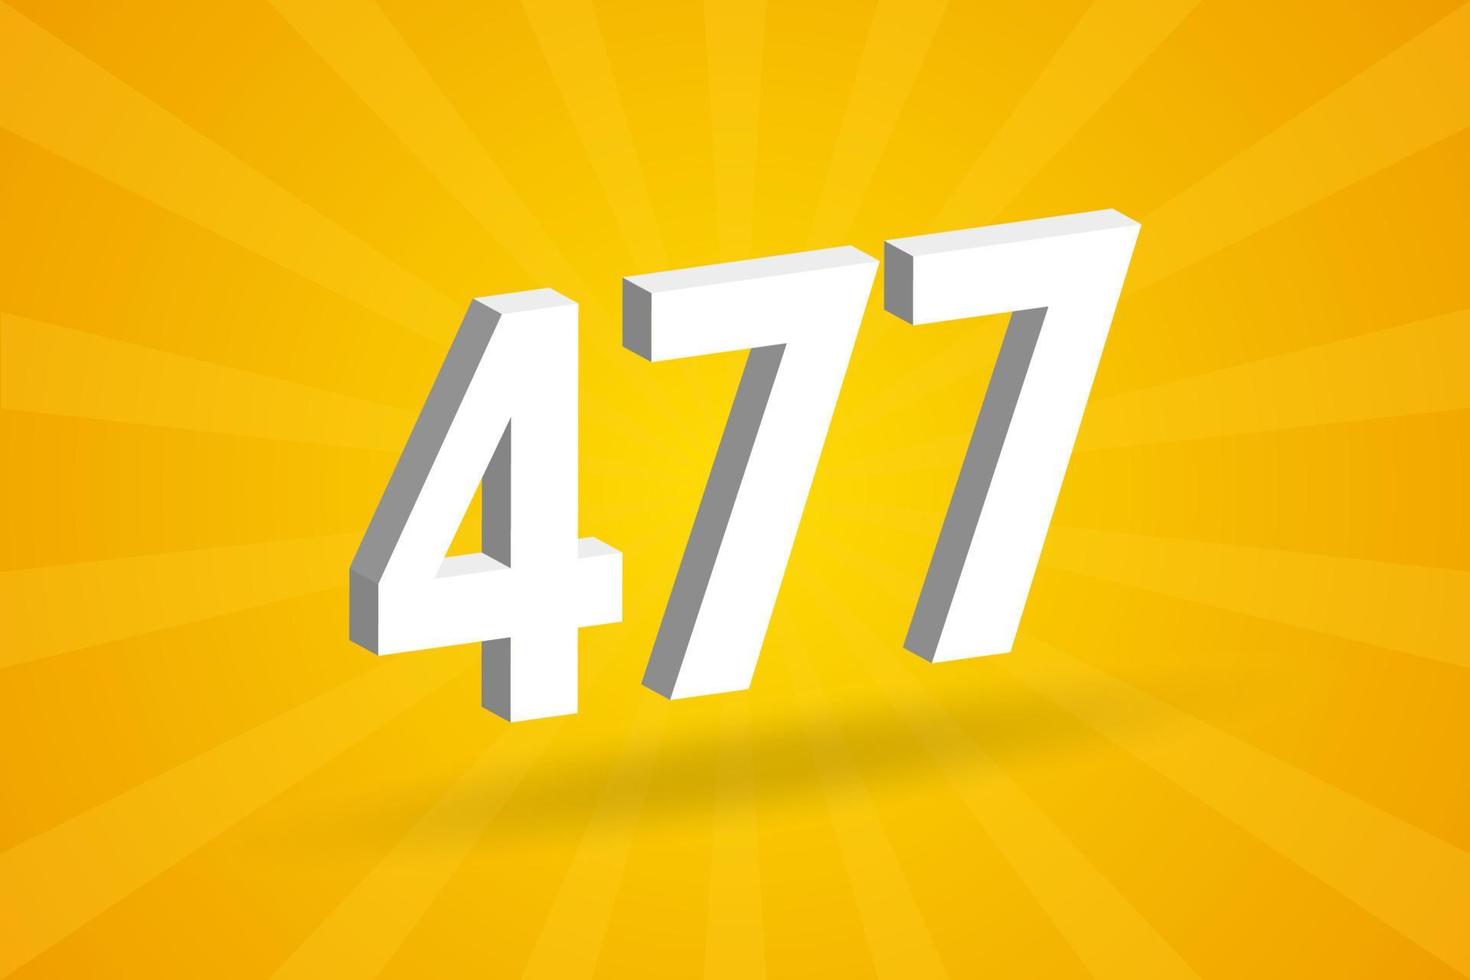 3D 477 number font alphabet. White 3D Number 477 with yellow background vector